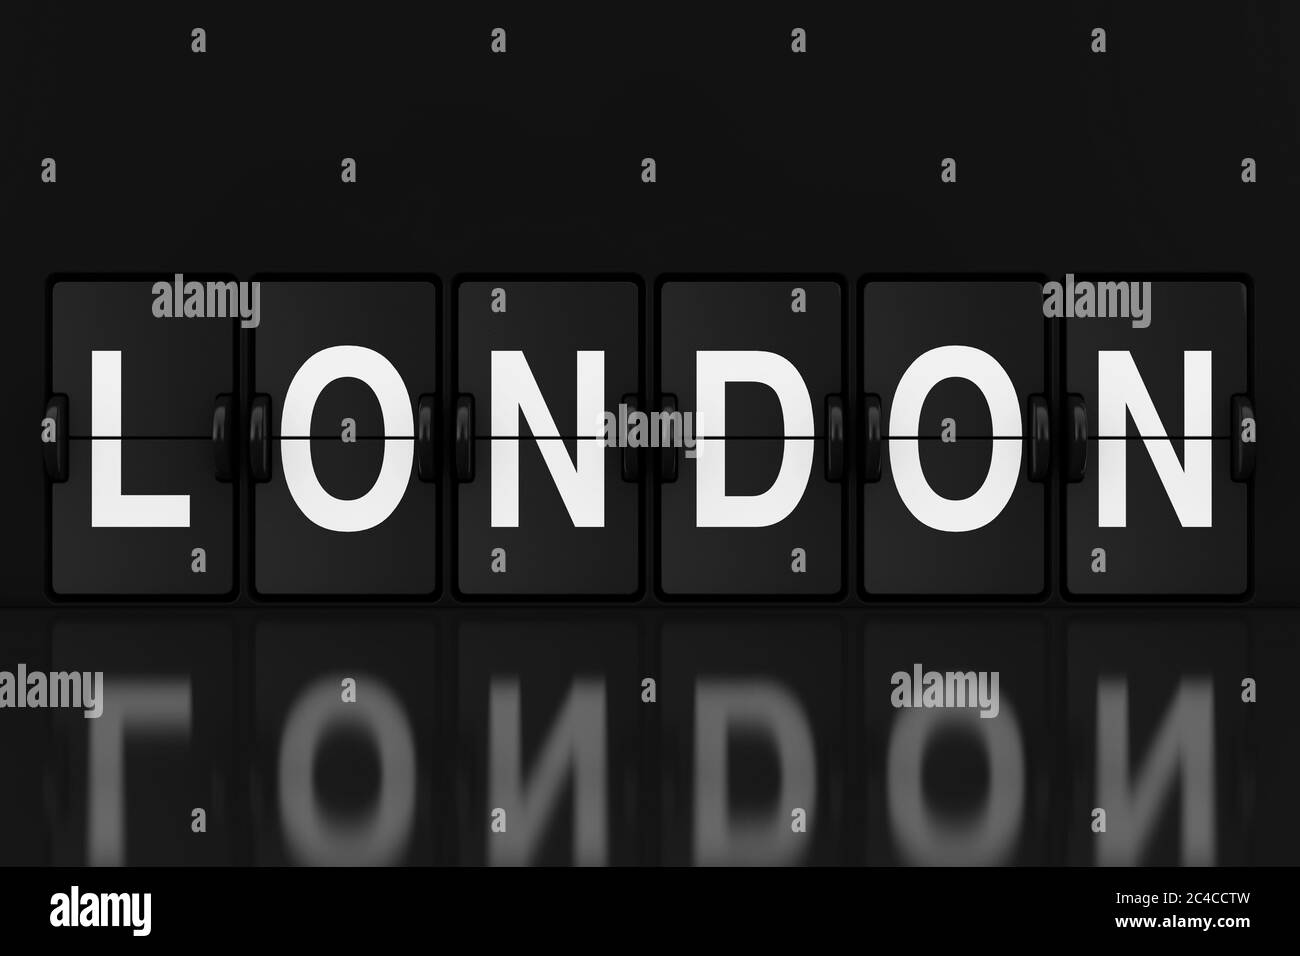 Mechanical Analog Flip Clock Board with London Sign extreme closeup. 3d Rendering Stock Photo